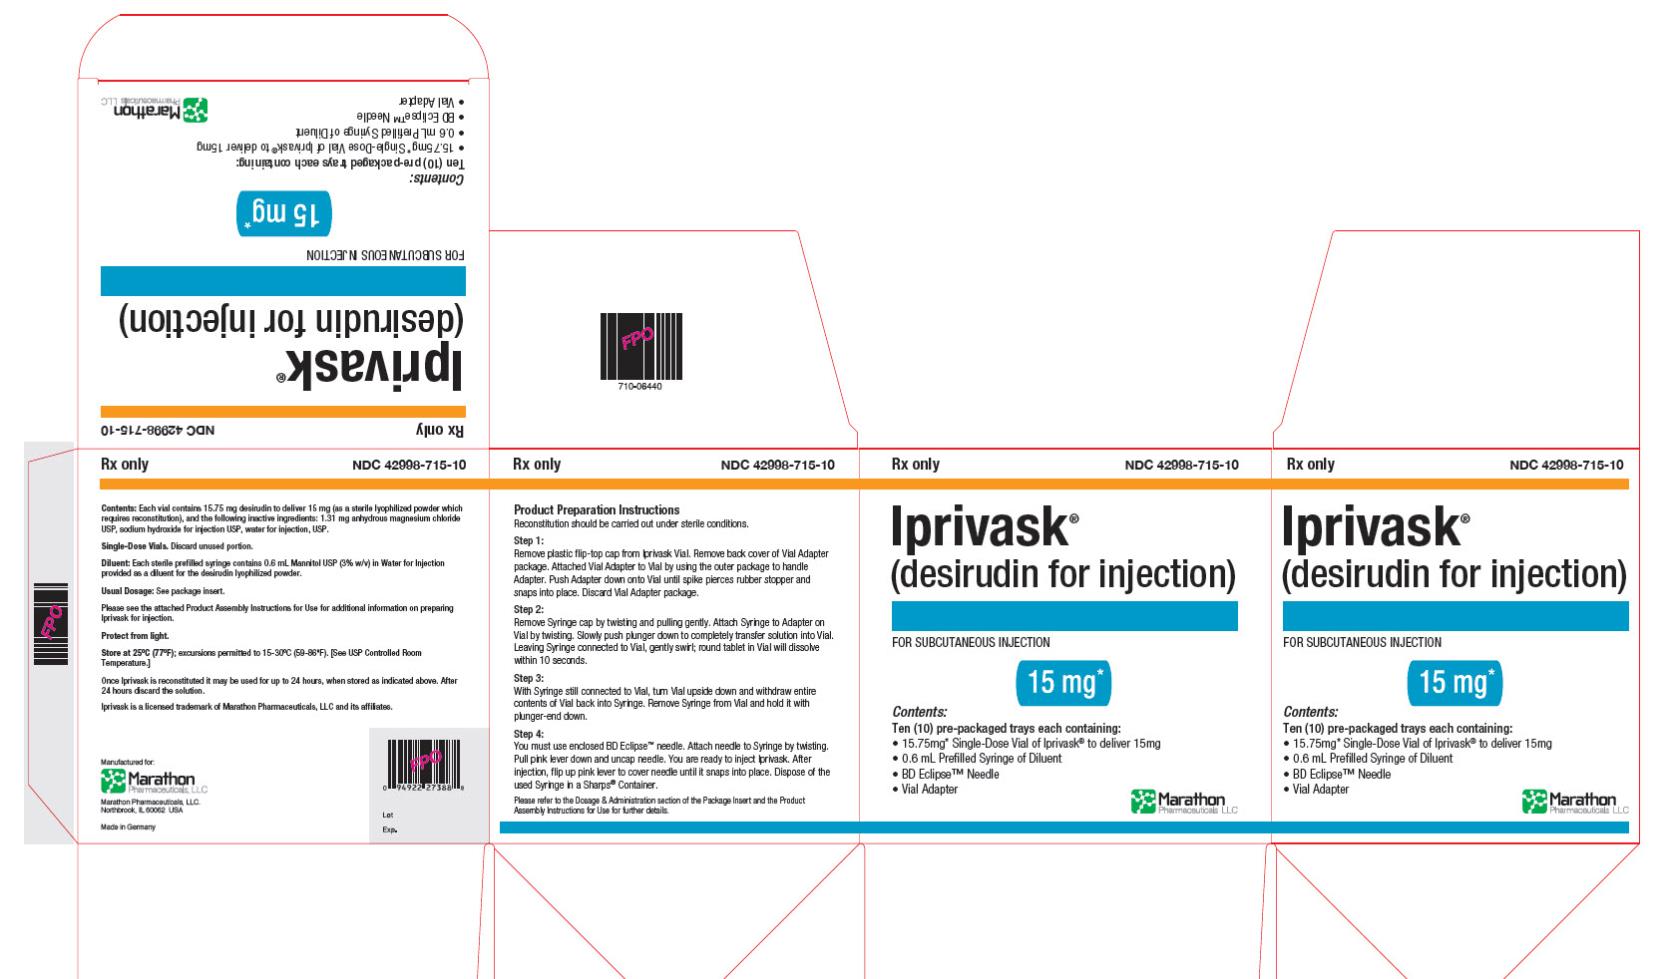 PRINCIPAL DISPLAY PANEL
Rx only
NDC 42998-715-10
Iprivask
(desirudin for injection)
FOR SUBCUTANEOUS INJECTION
15 mg*
Marathon Pharmaceuticals LLC
